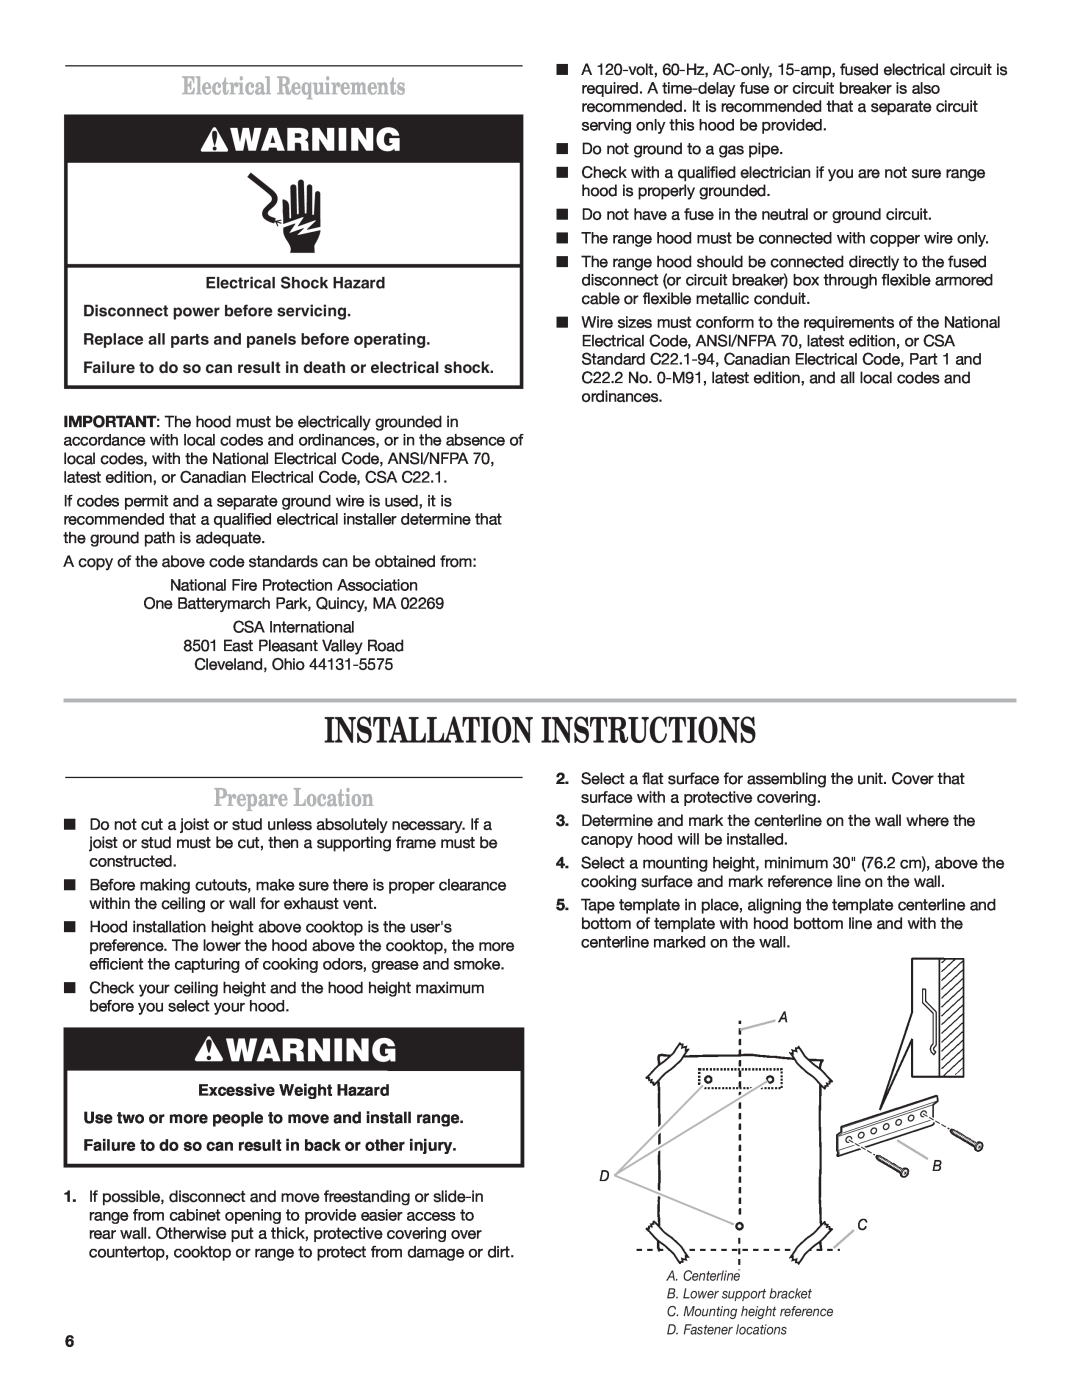 Whirlpool 19760268A Installation Instructions, Electrical Requirements, Prepare Location, Excessive Weight Hazard 